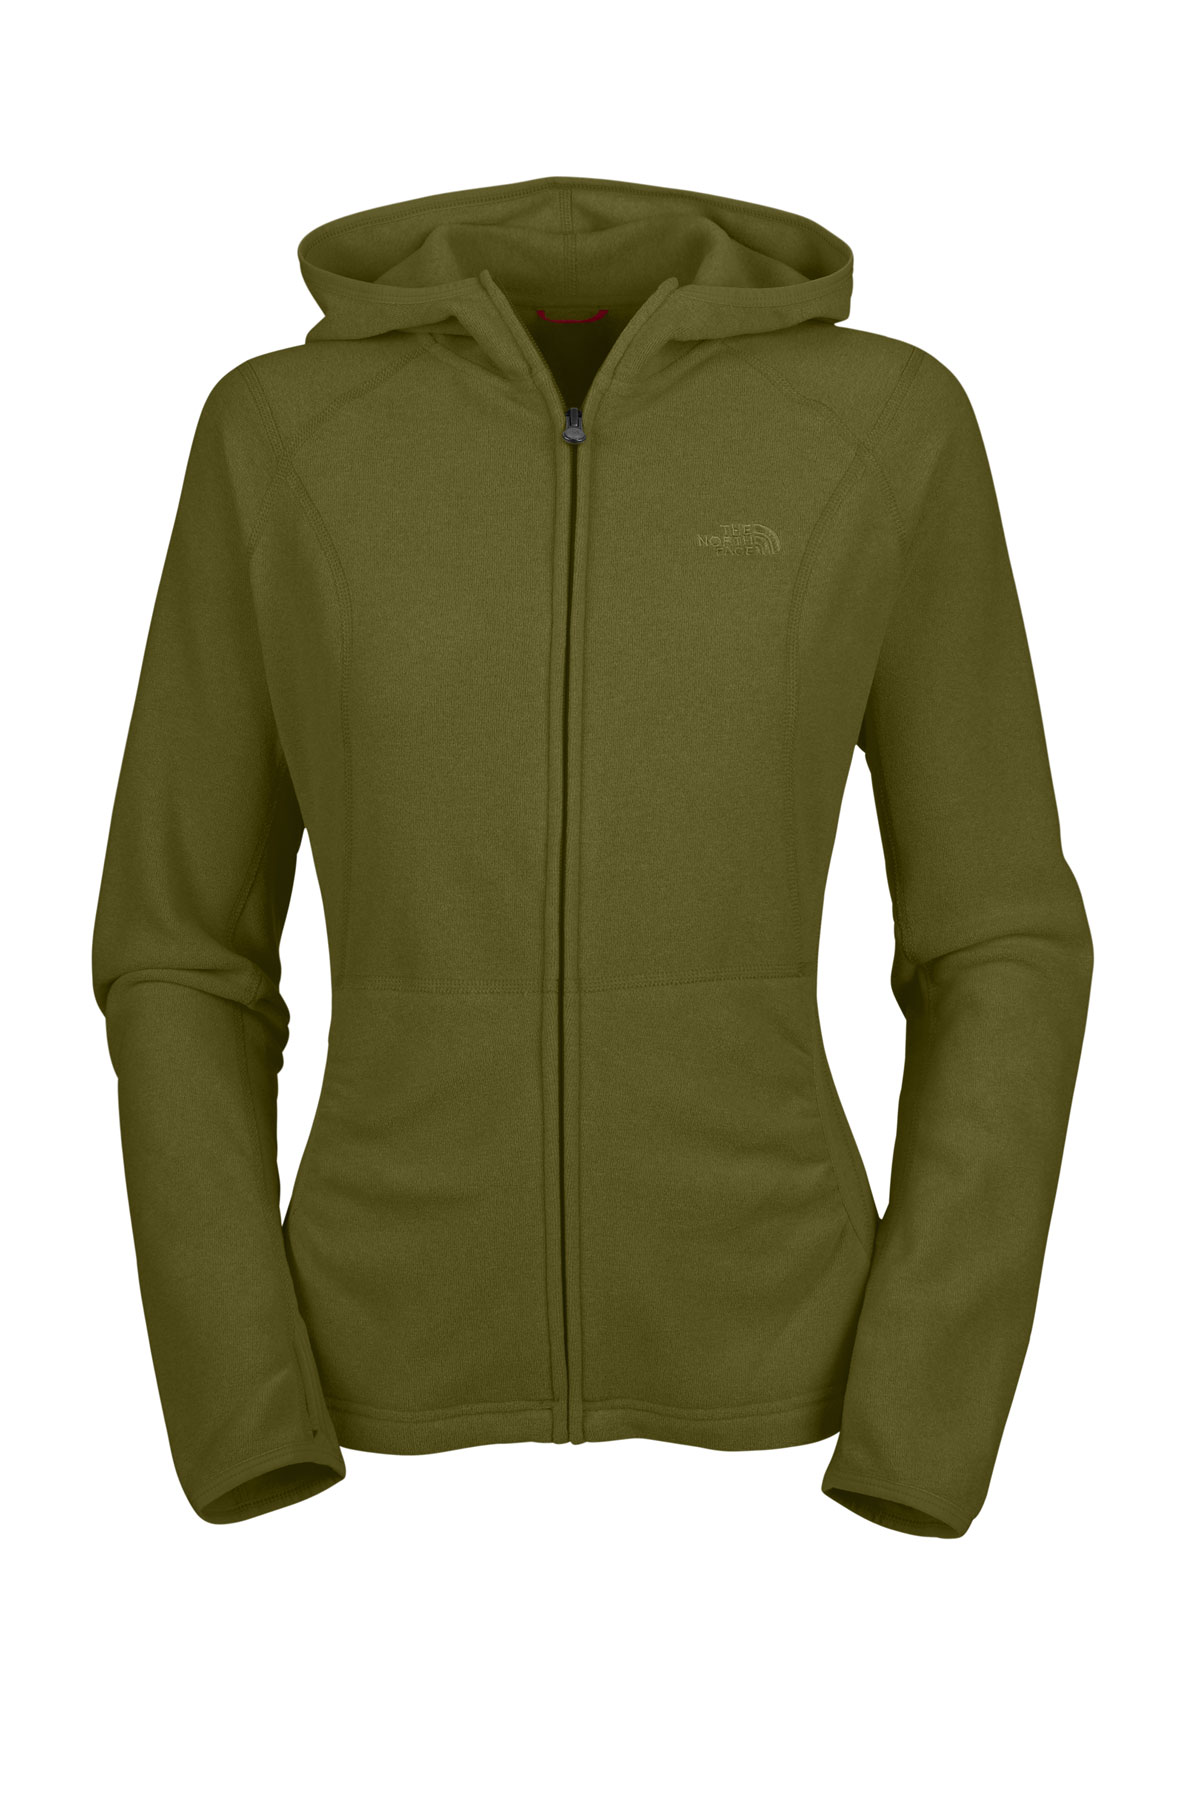 The North Face TKA 100 Texture Masonic Hoodie Women's at